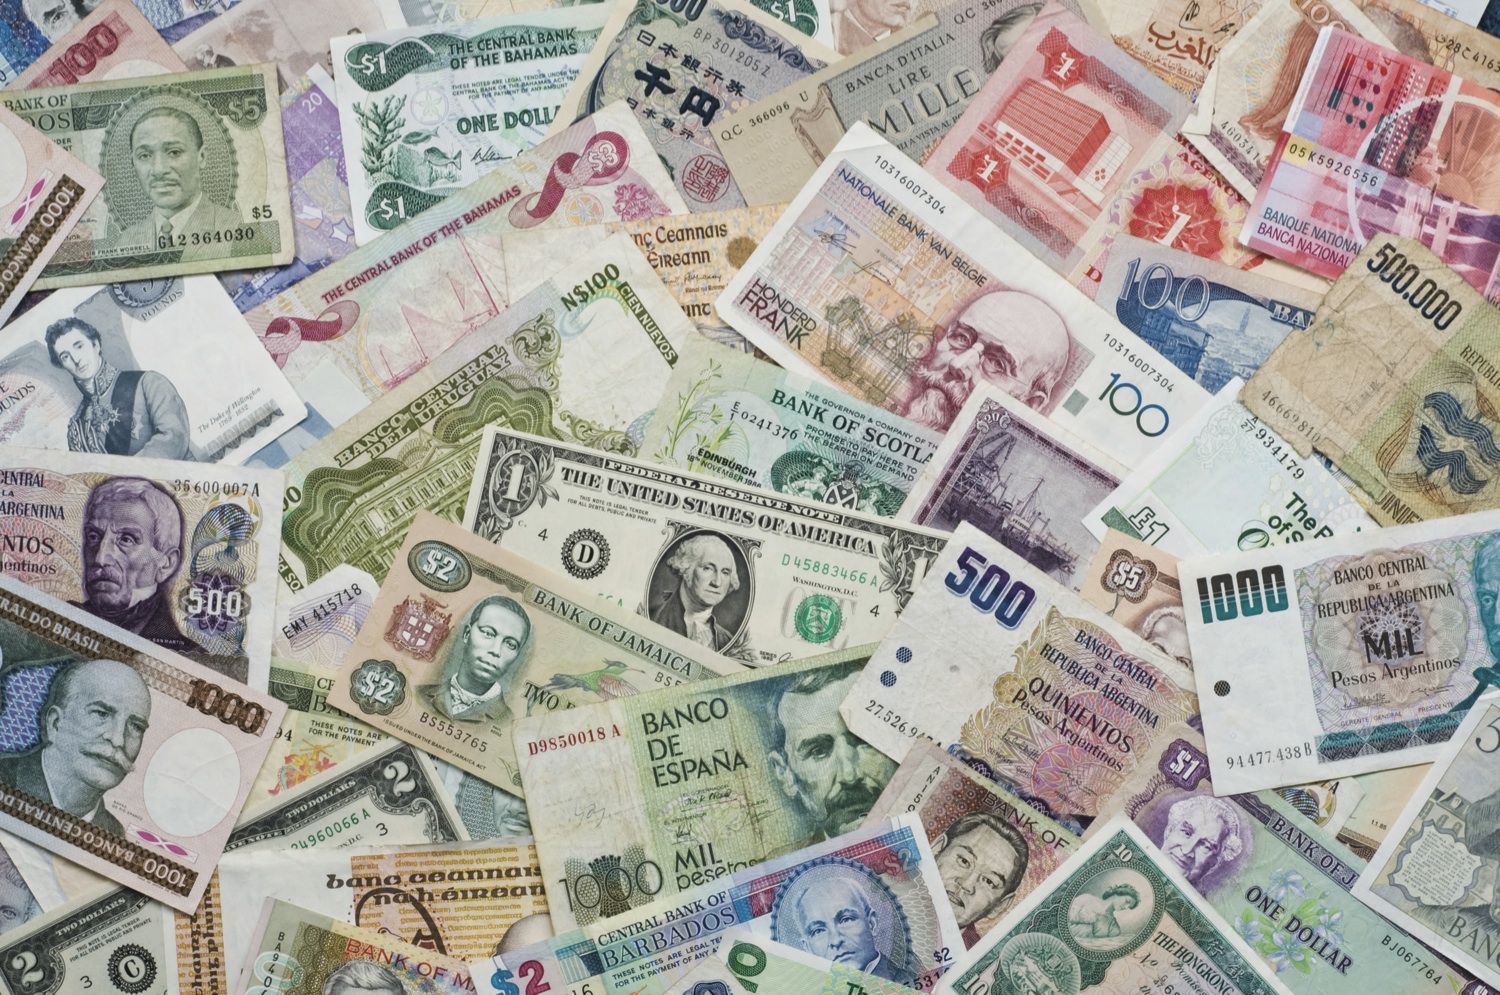 World currency